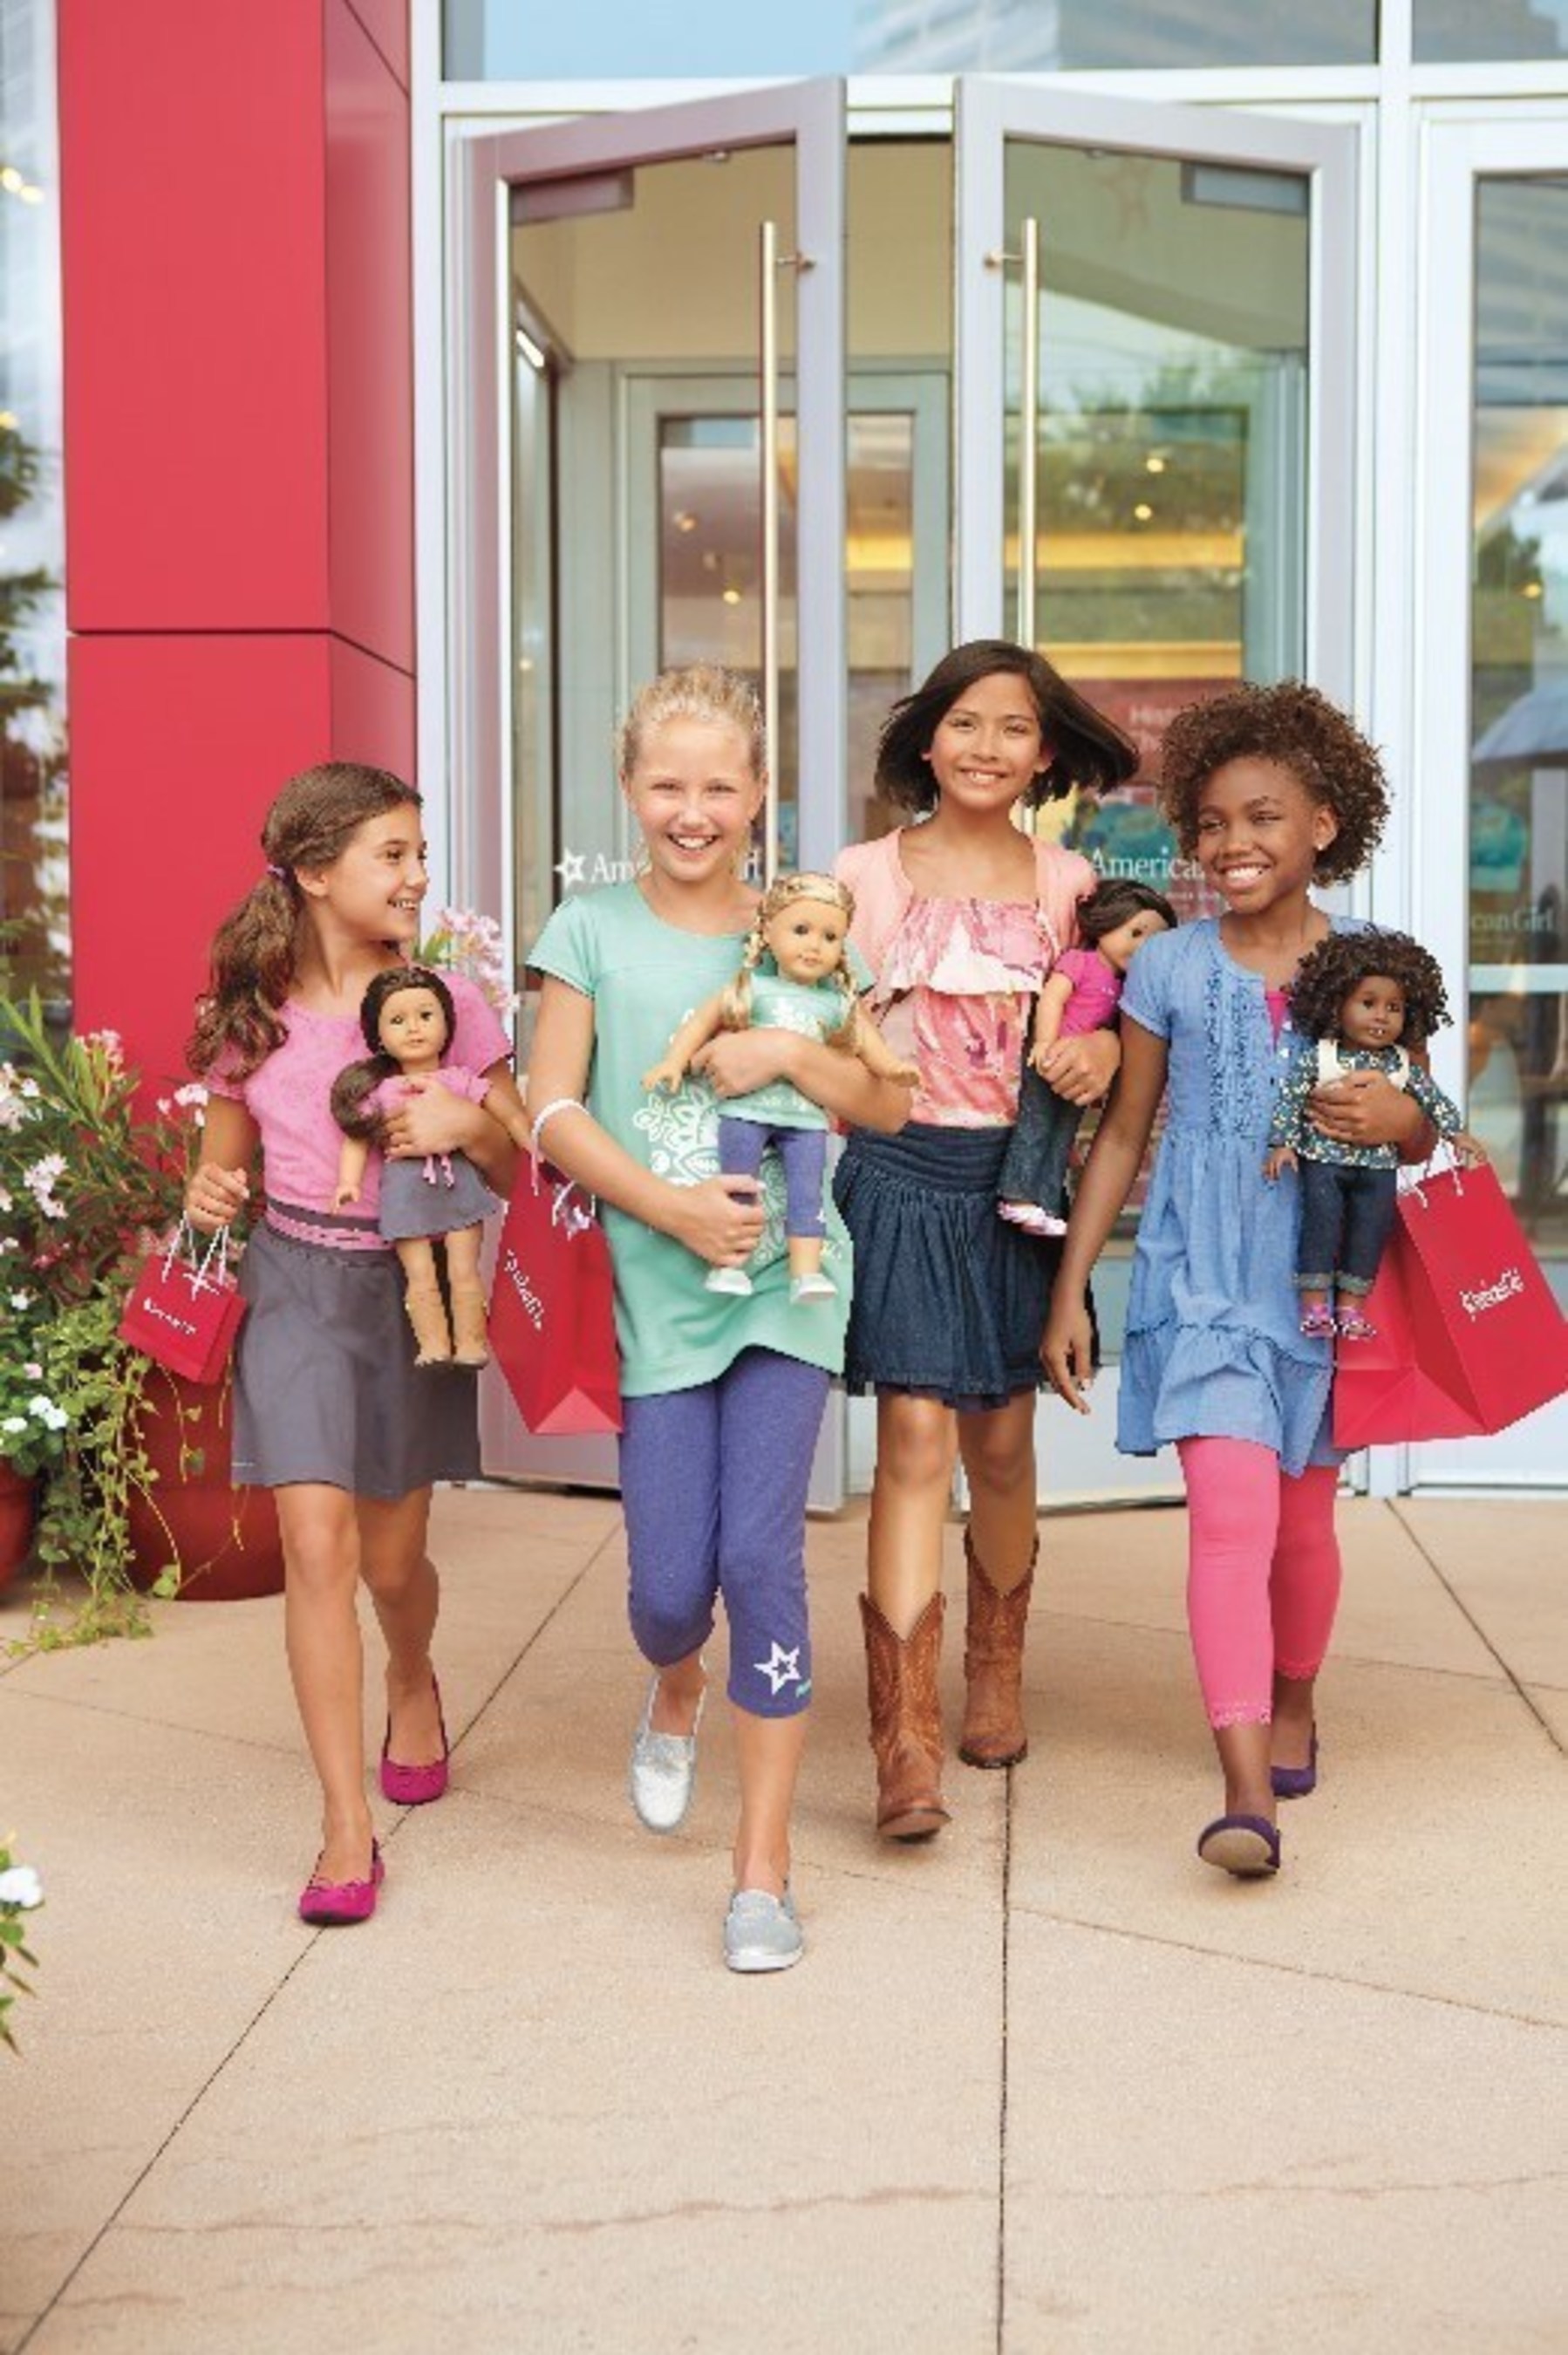 Select Marriott hotels near American Girl stores invite travelers to treat the girls (and dolls) in their life to an American Girl Weekend Getaway Package and create magical memories for seasons to come. Deluxe accommodations will feature exclusive American Girl doll beds for guests to take home. Additional special amenities can be enjoyed depending on location and package at select hotels including Renaissance Charlotte SouthPark Hotel, Atlanta Marriott Alpharetta, New York Marriott Marquis, Charlotte Marriott SouthPark, Tysons Corner Marriott, Courtyard Charlotte SouthPark and Residence Inn Atlanta Alpharetta/North Point Mall.